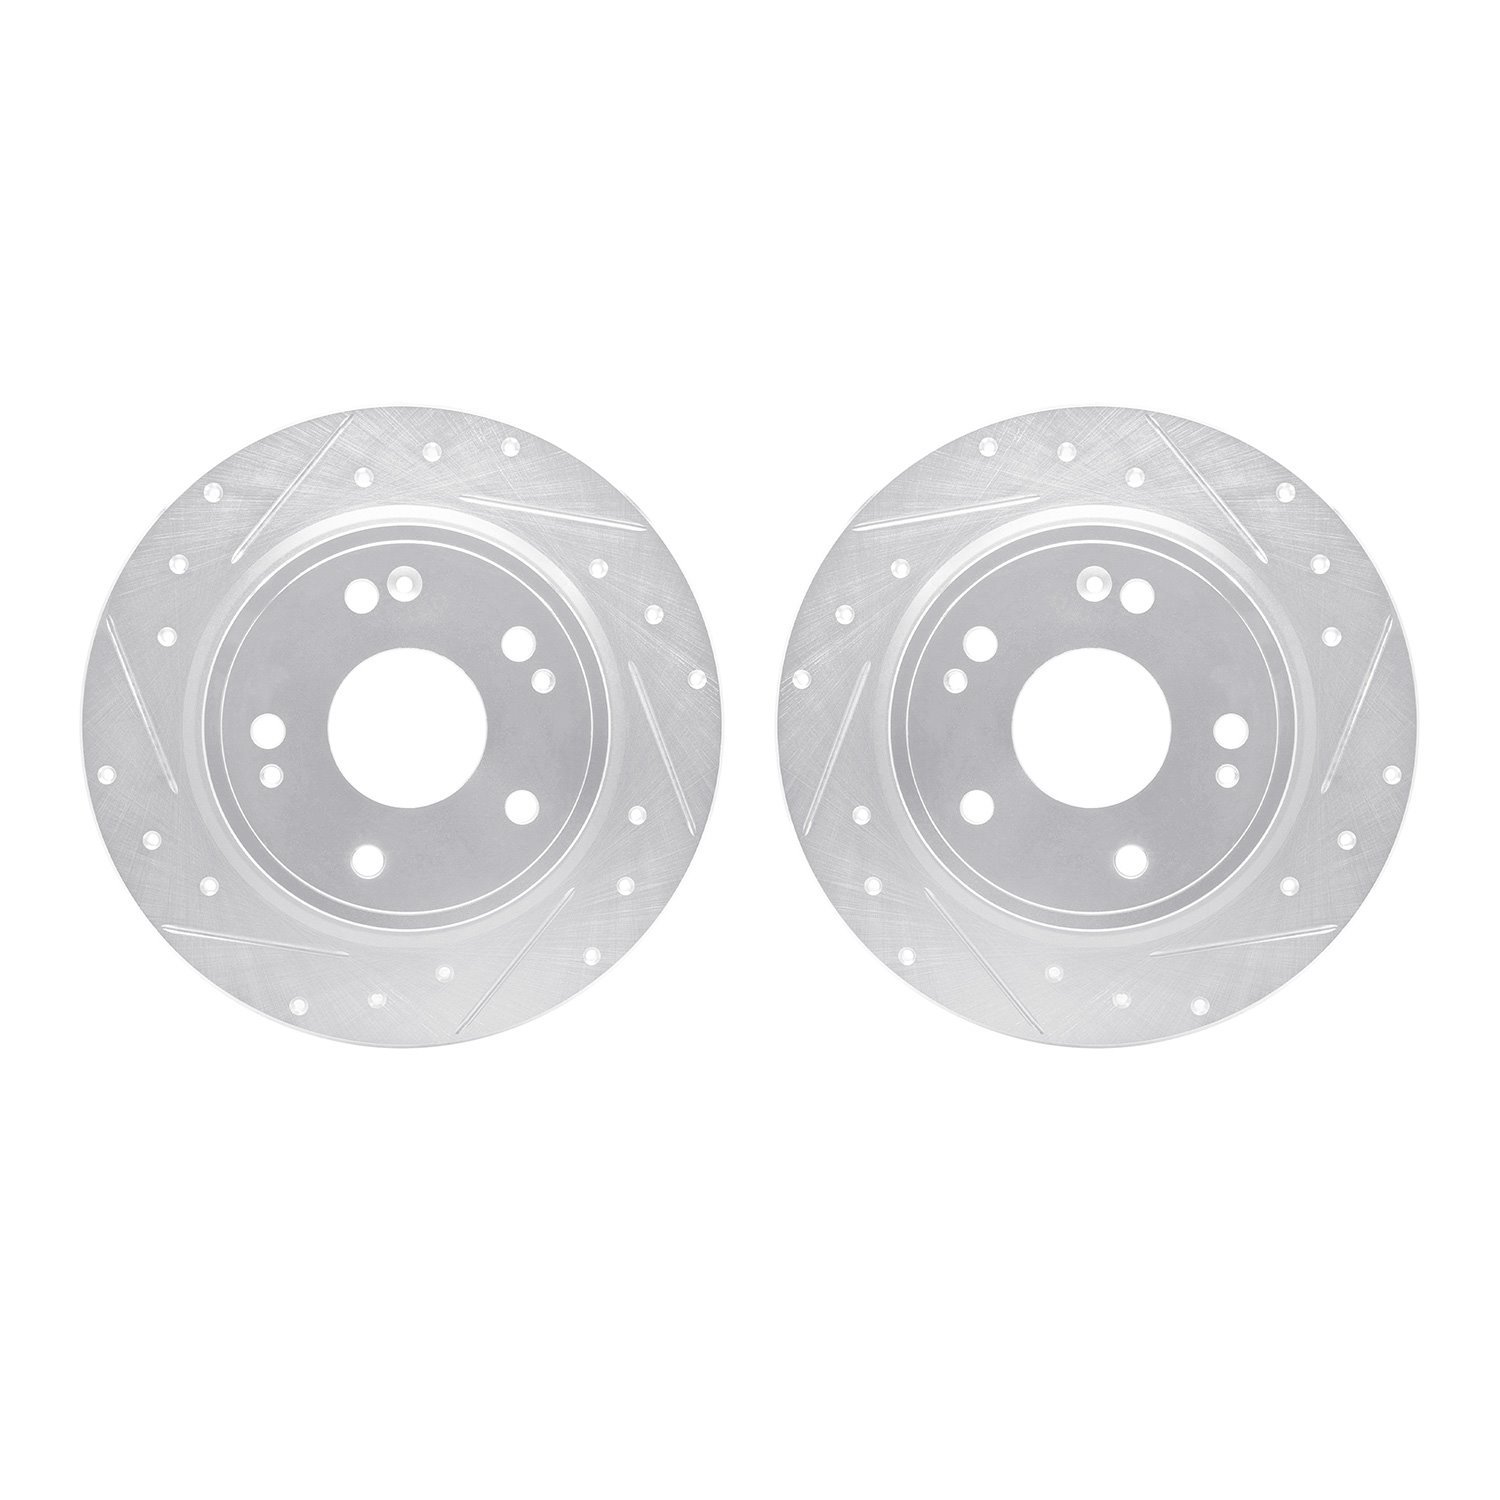 7002-59057 Drilled/Slotted Brake Rotors [Silver], Fits Select Acura/Honda, Position: Rear